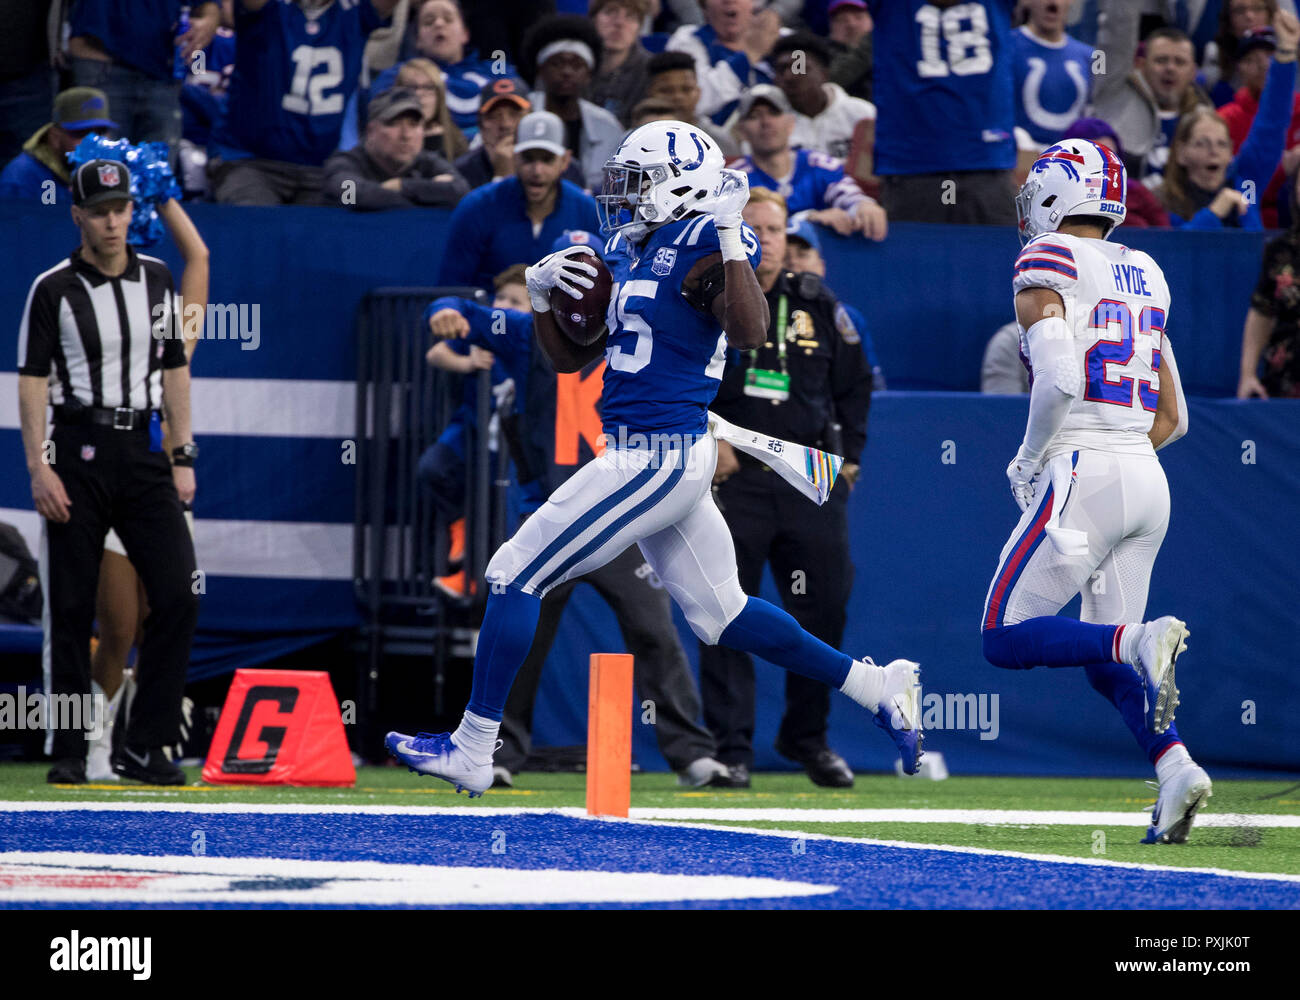 Indianapolis, Indiana, USA. 21st Oct, 2018. Indianapolis Colts running back Marlon Mack (25) scores touchdown during NFL football game action between the Buffalo Bills and the Indianapolis Colts at Lucas Oil Stadium in Indianapolis, Indiana. Indianapolis defeated Buffalo 37-5. John Mersits/CSM/Alamy Live News Stock Photo